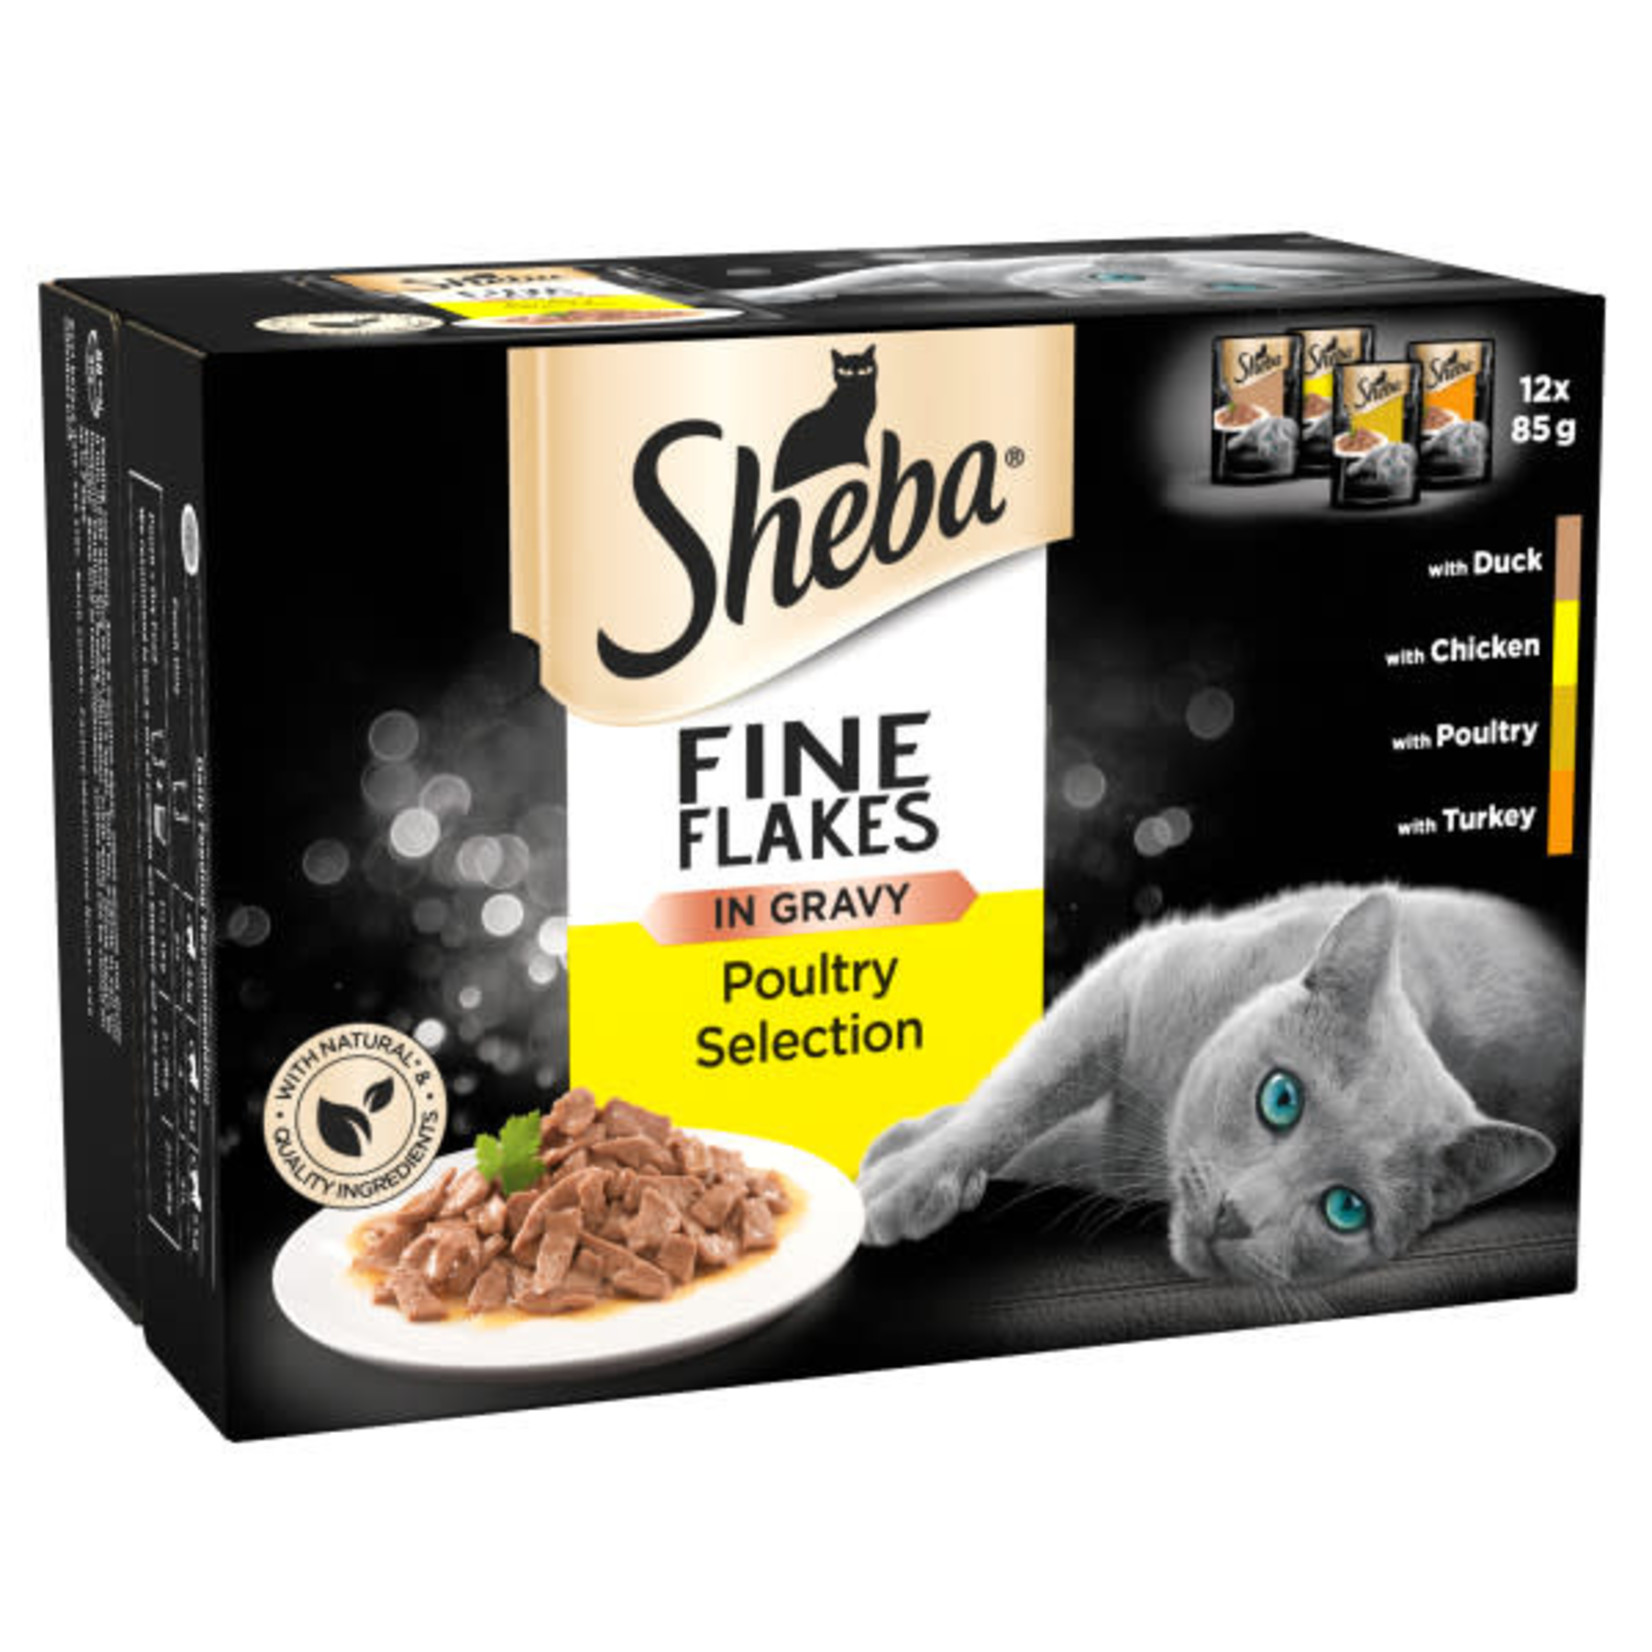 Sheba Fine Flakes Adult & Senior Cat Wet Food Poultry Collection in Gravy, 12 x 85g